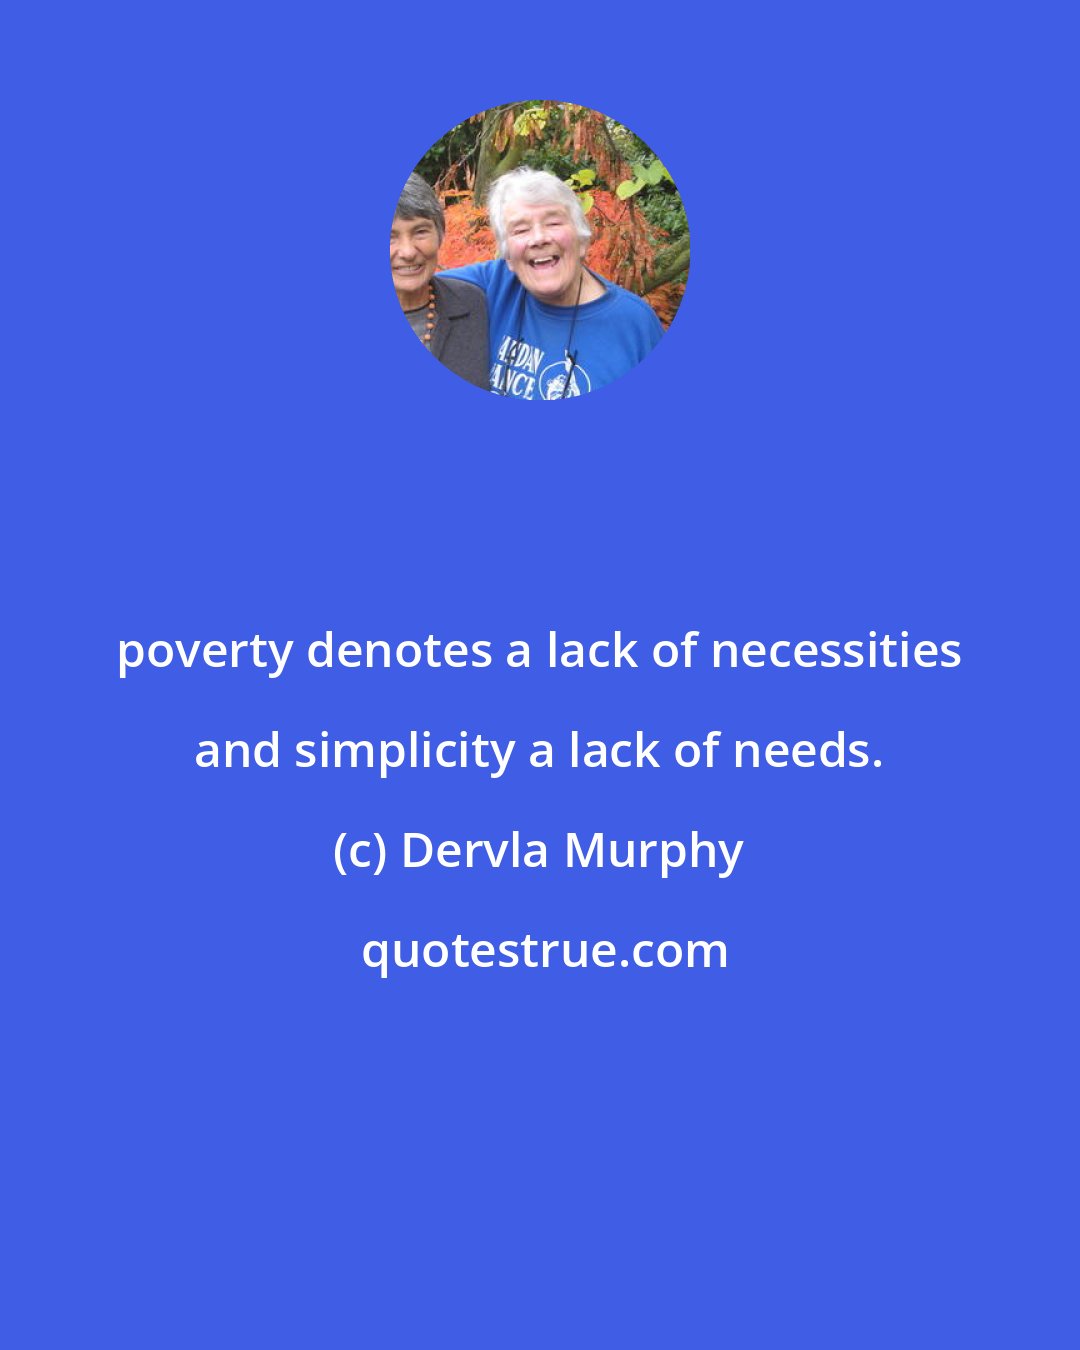 Dervla Murphy: poverty denotes a lack of necessities and simplicity a lack of needs.